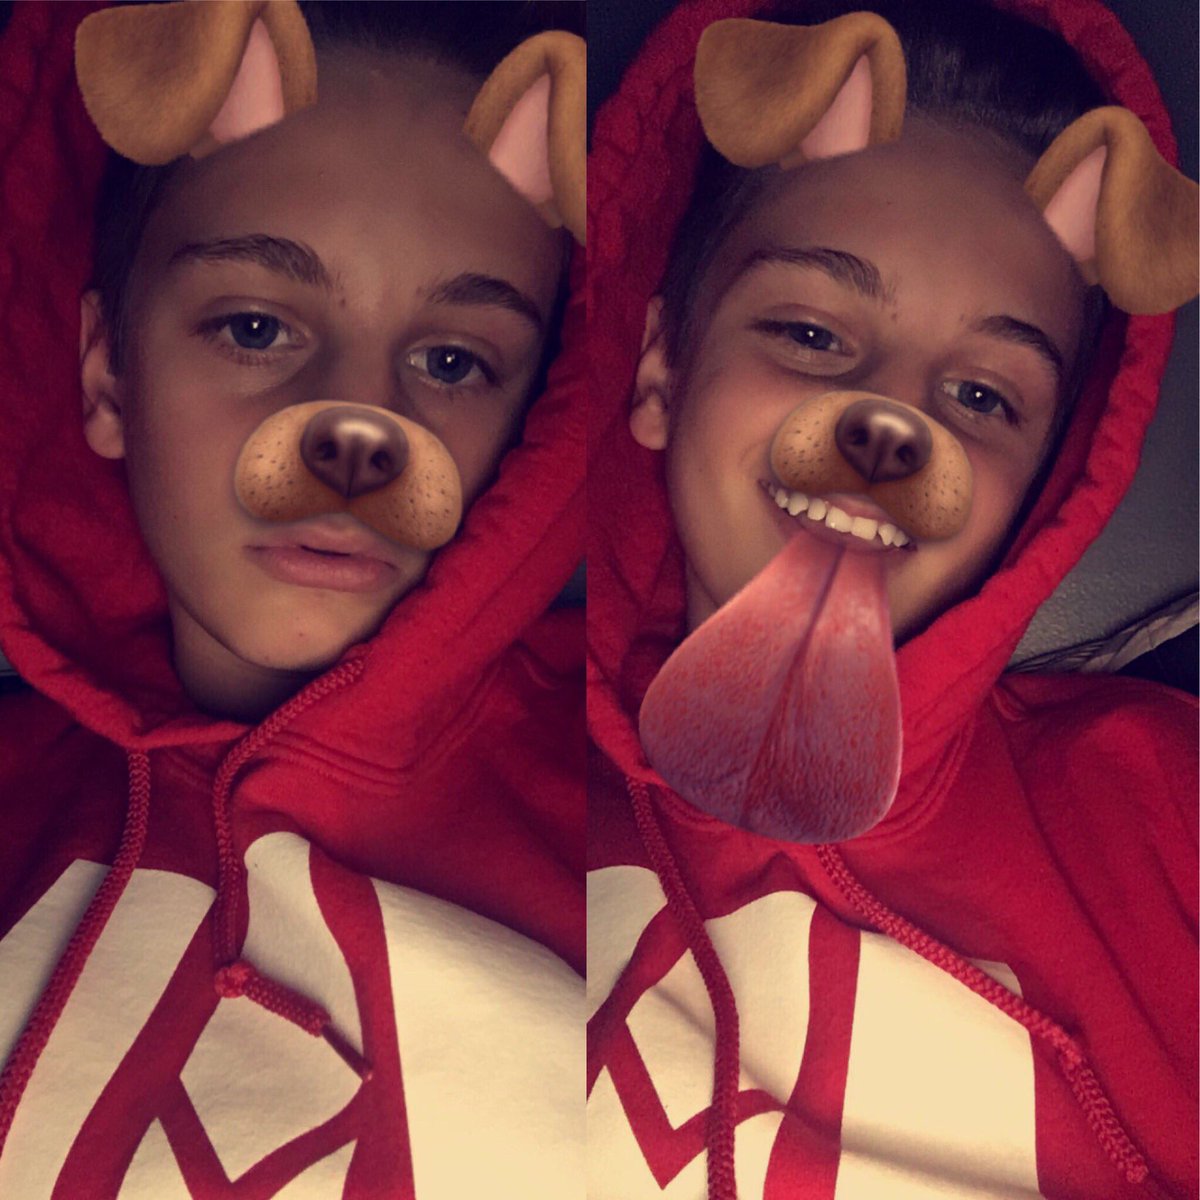 my lil bean's smile makes my day 1000x better @duhitzmark.